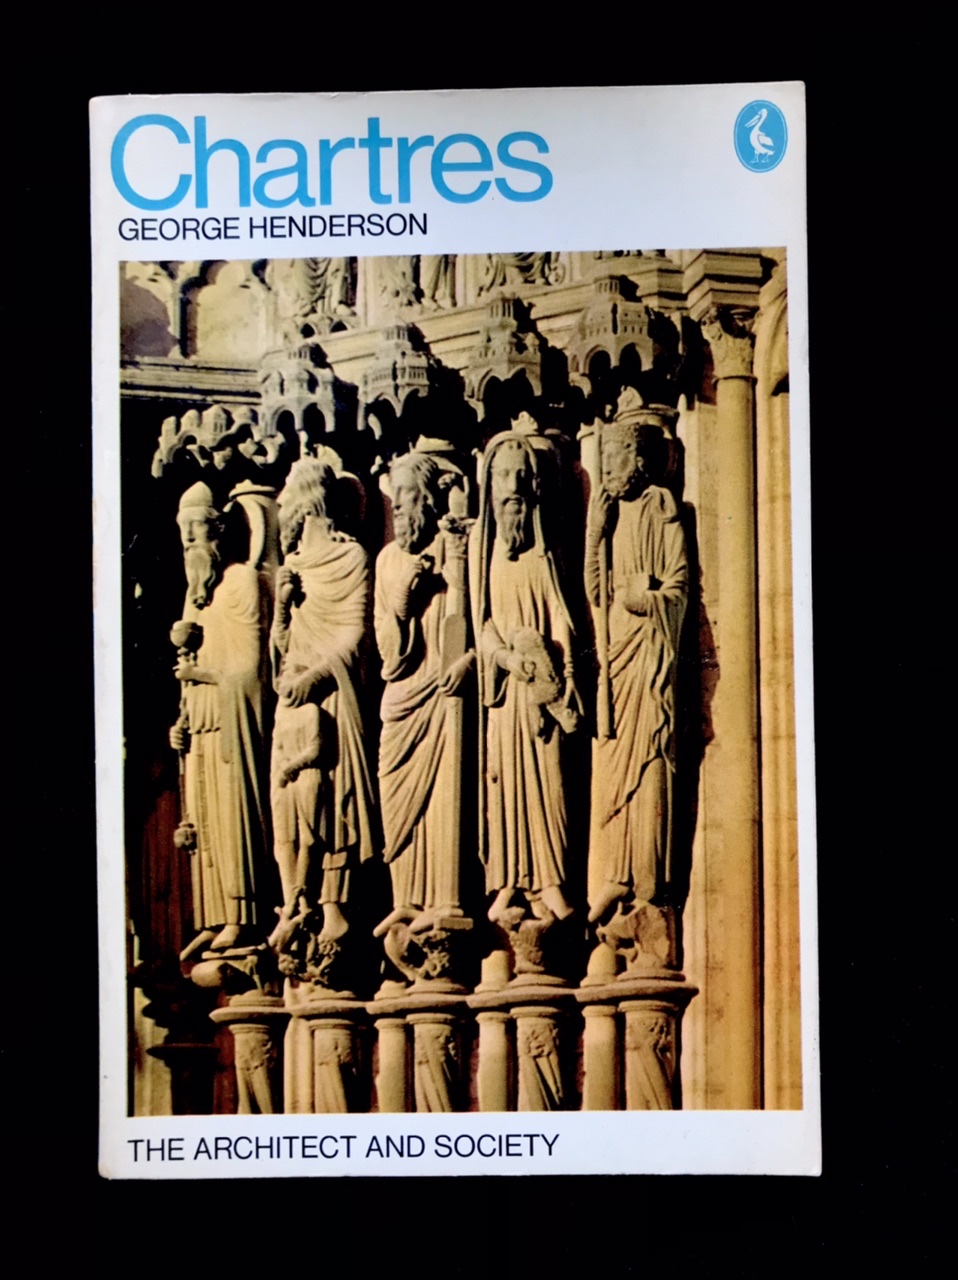 Chartres by George Henderson